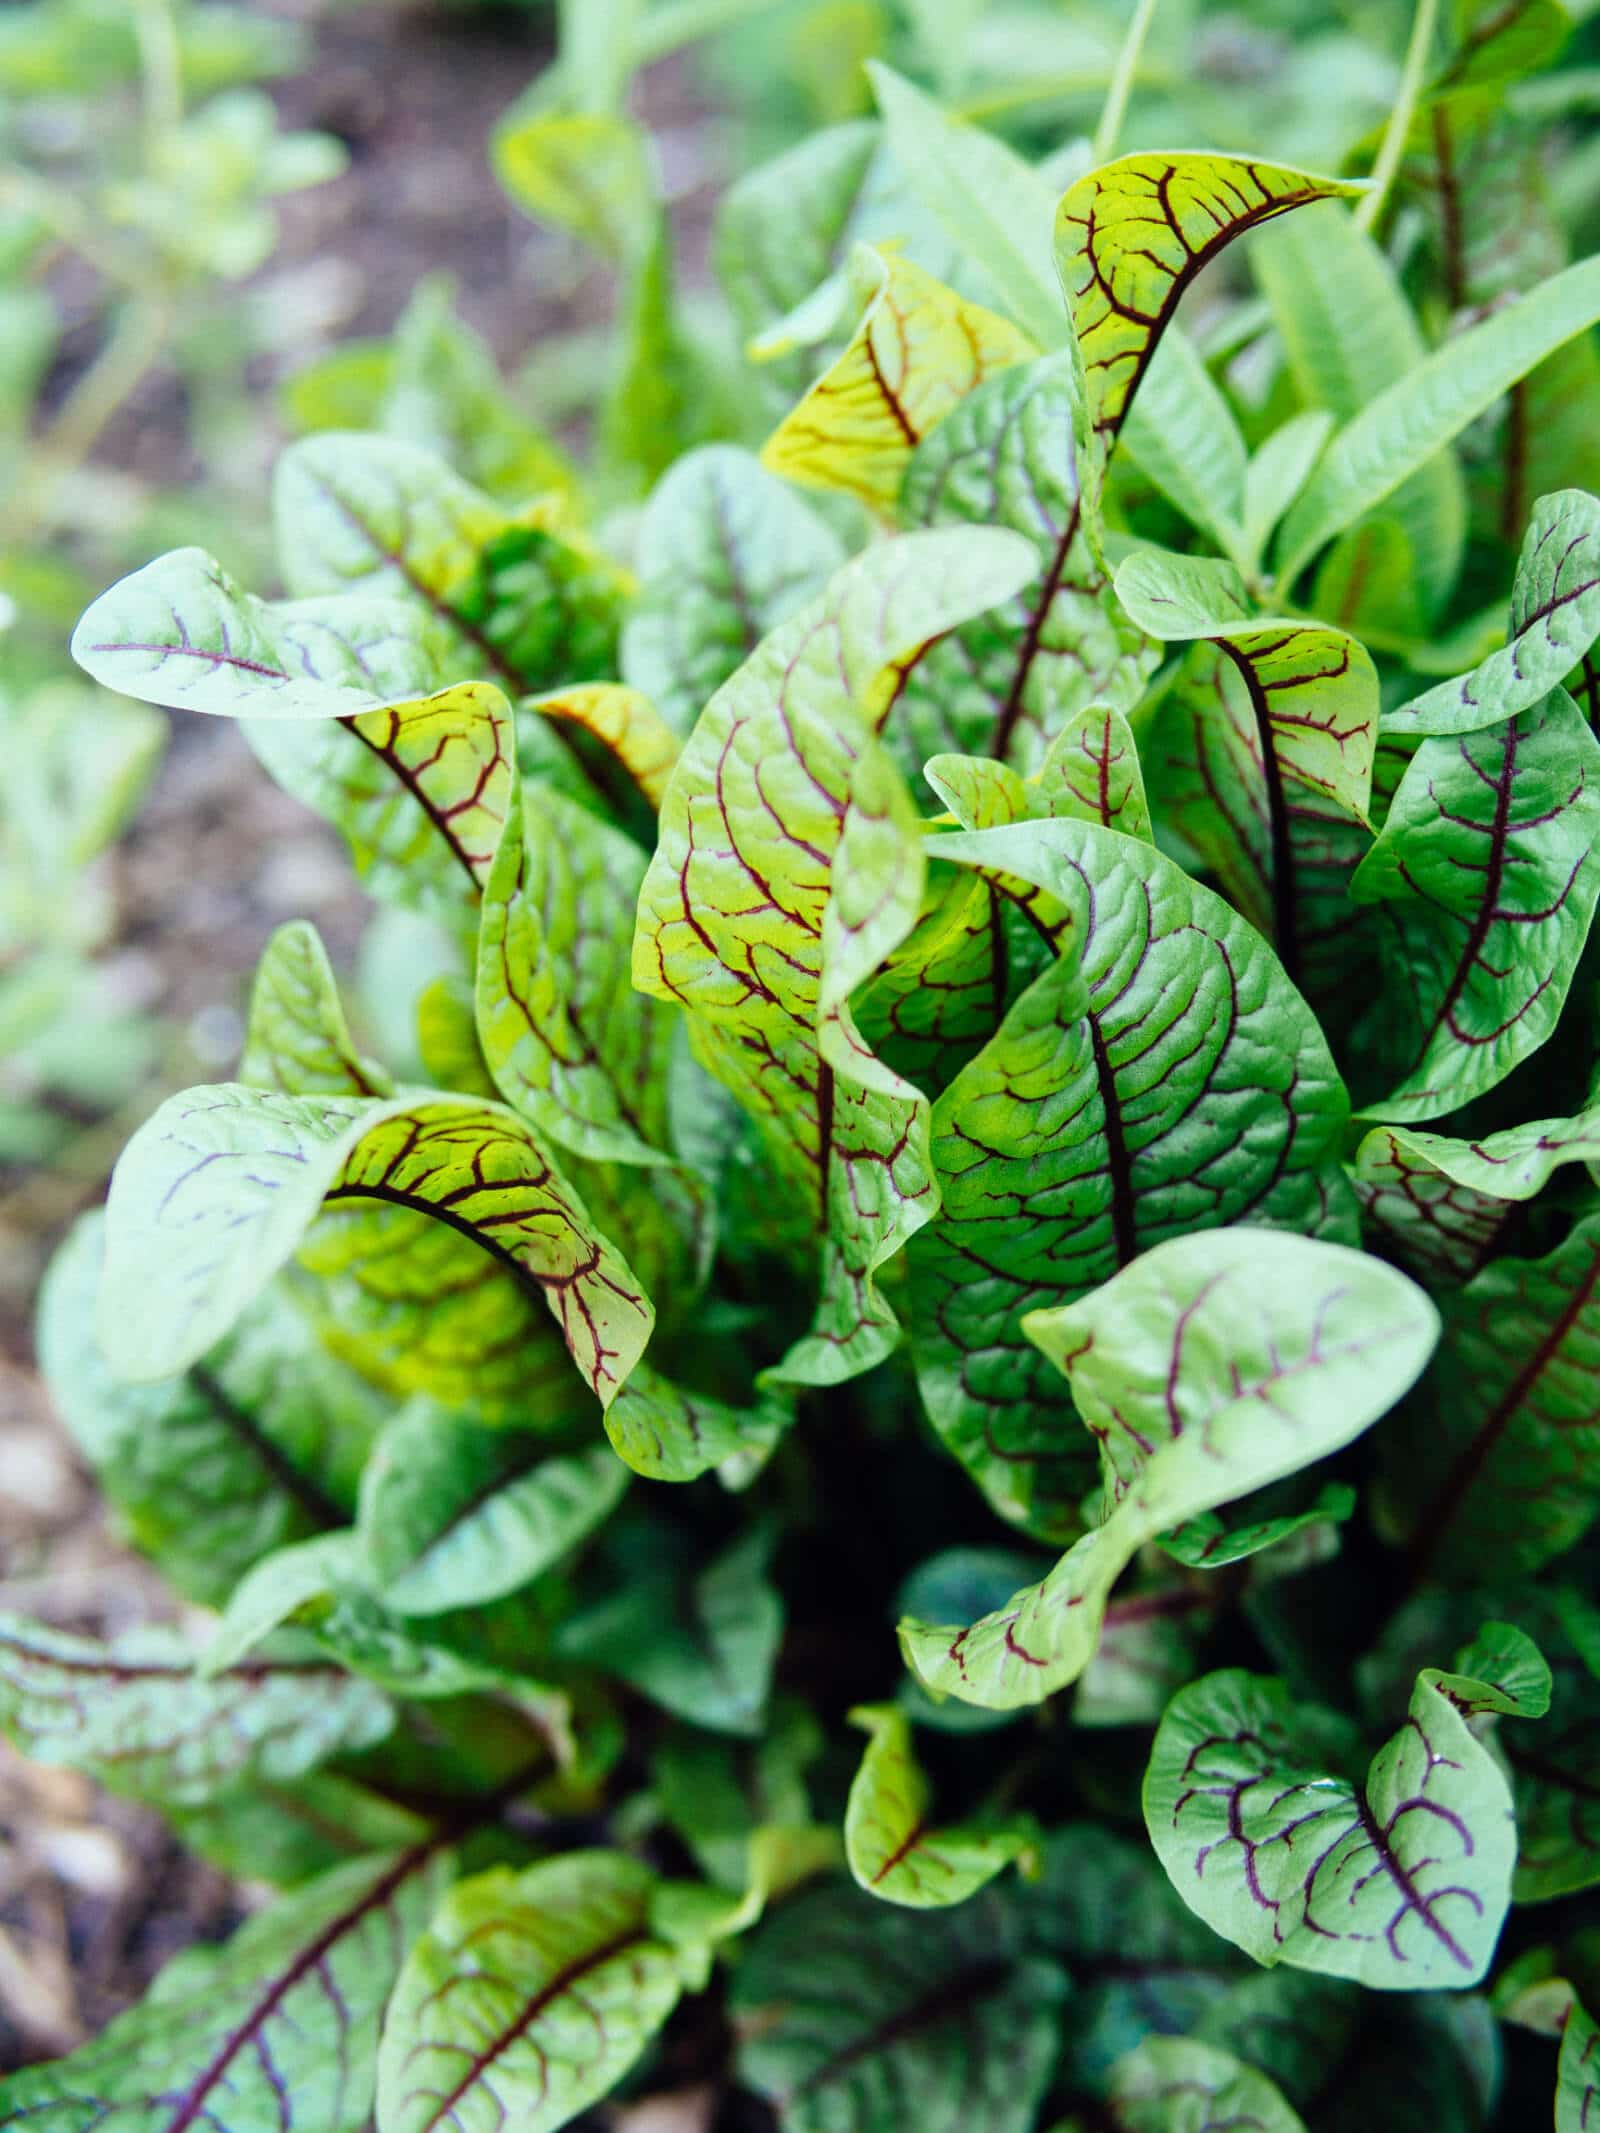 Red-veined sorrel (bloody dock) is a leafy green that grows in shade